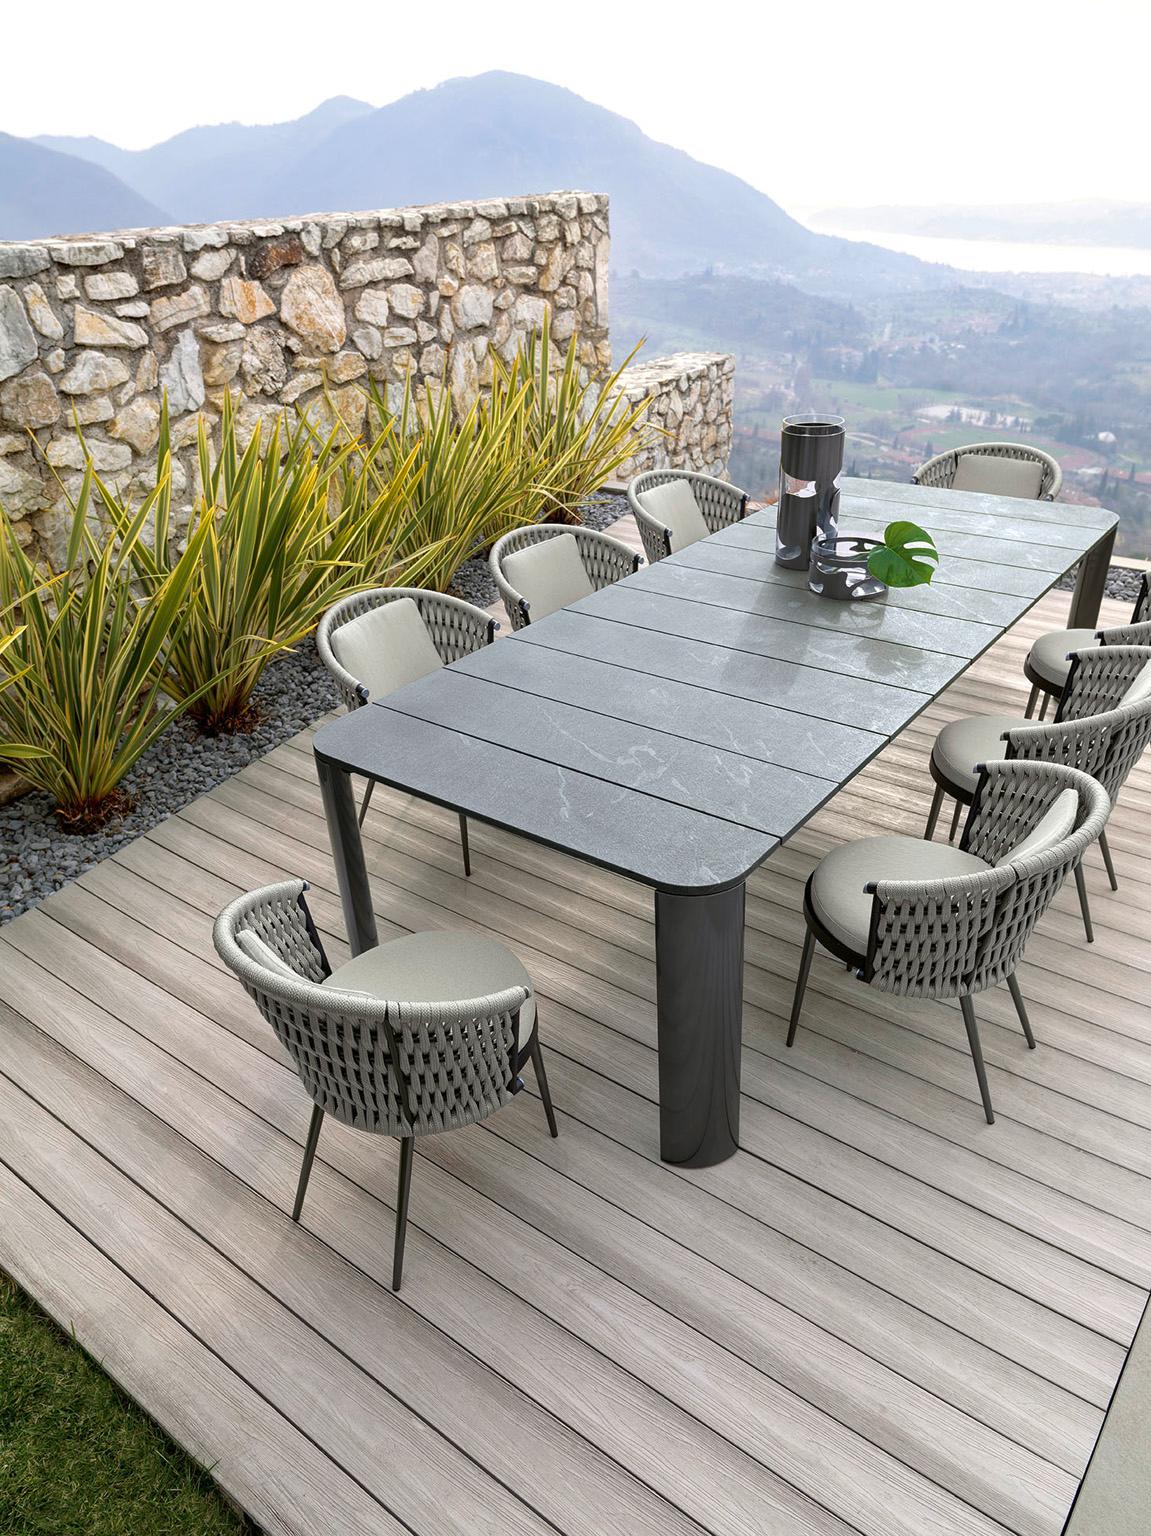 Giorgio Collection Oasi Outdoor Collection
Outdoor rectangular table with top made by slats of treated 